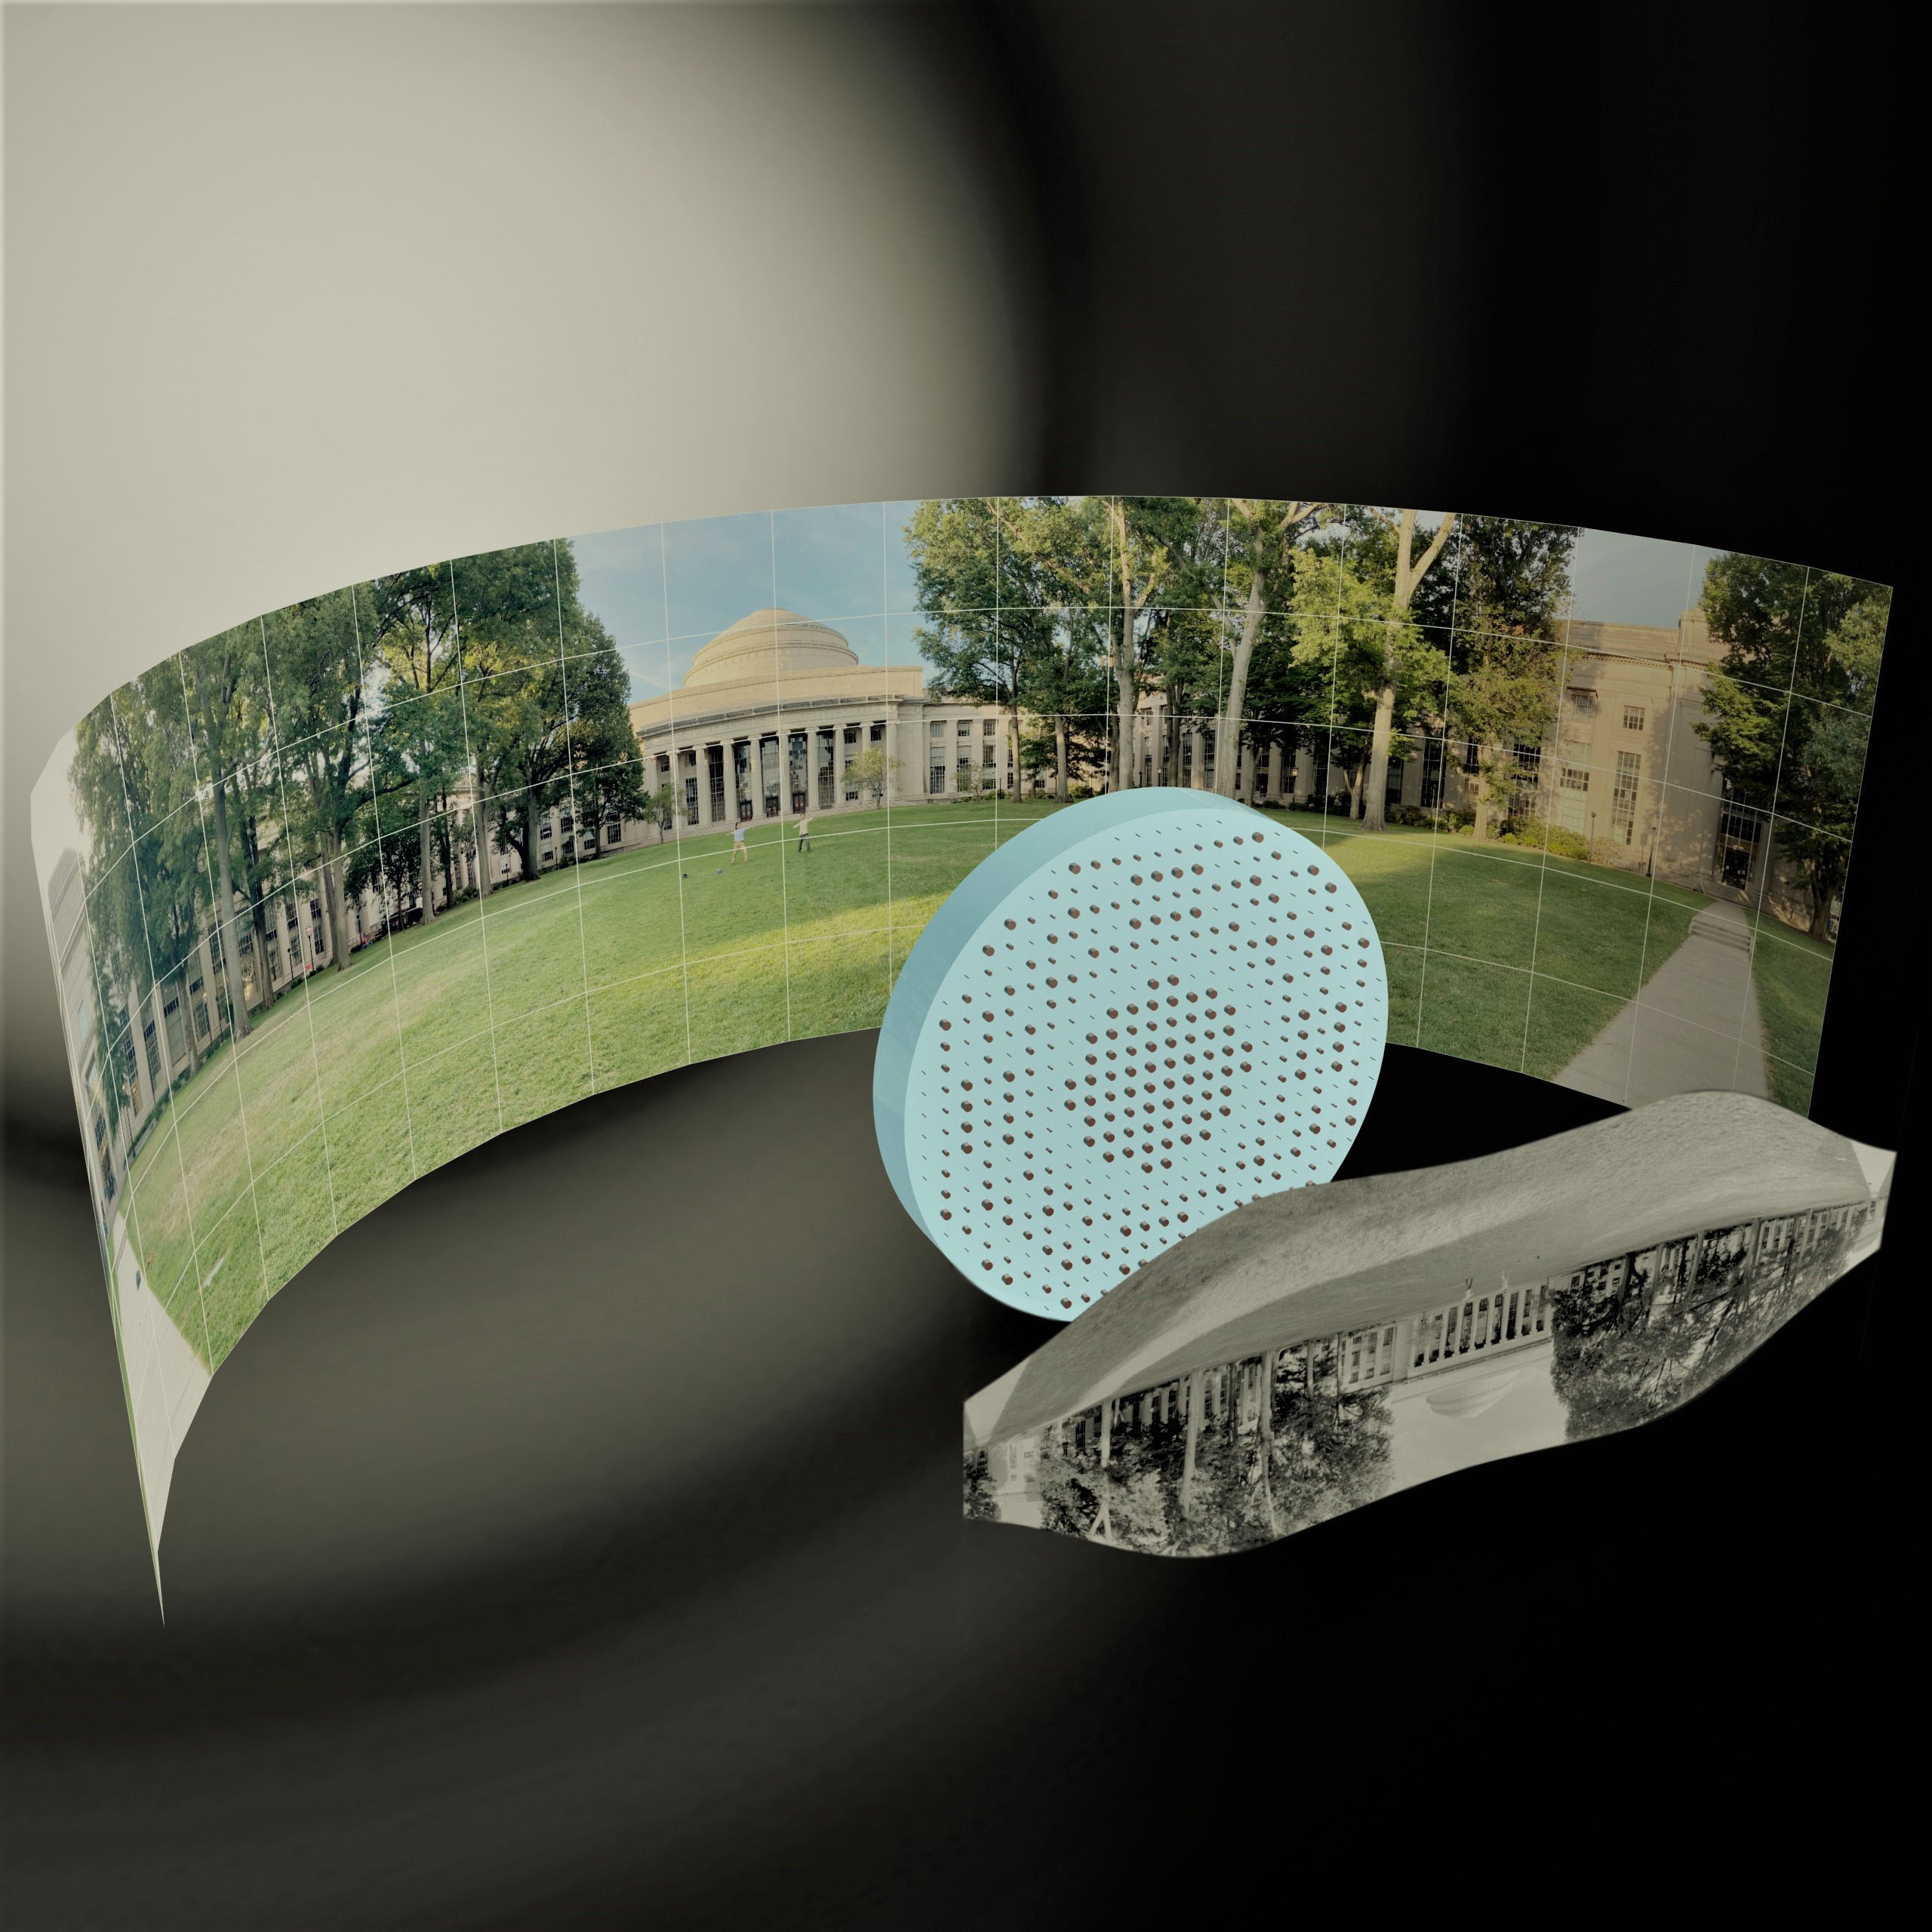 geloof Haven Meevoelen Engineers produce a fisheye lens that's completely flat | MIT News |  Massachusetts Institute of Technology